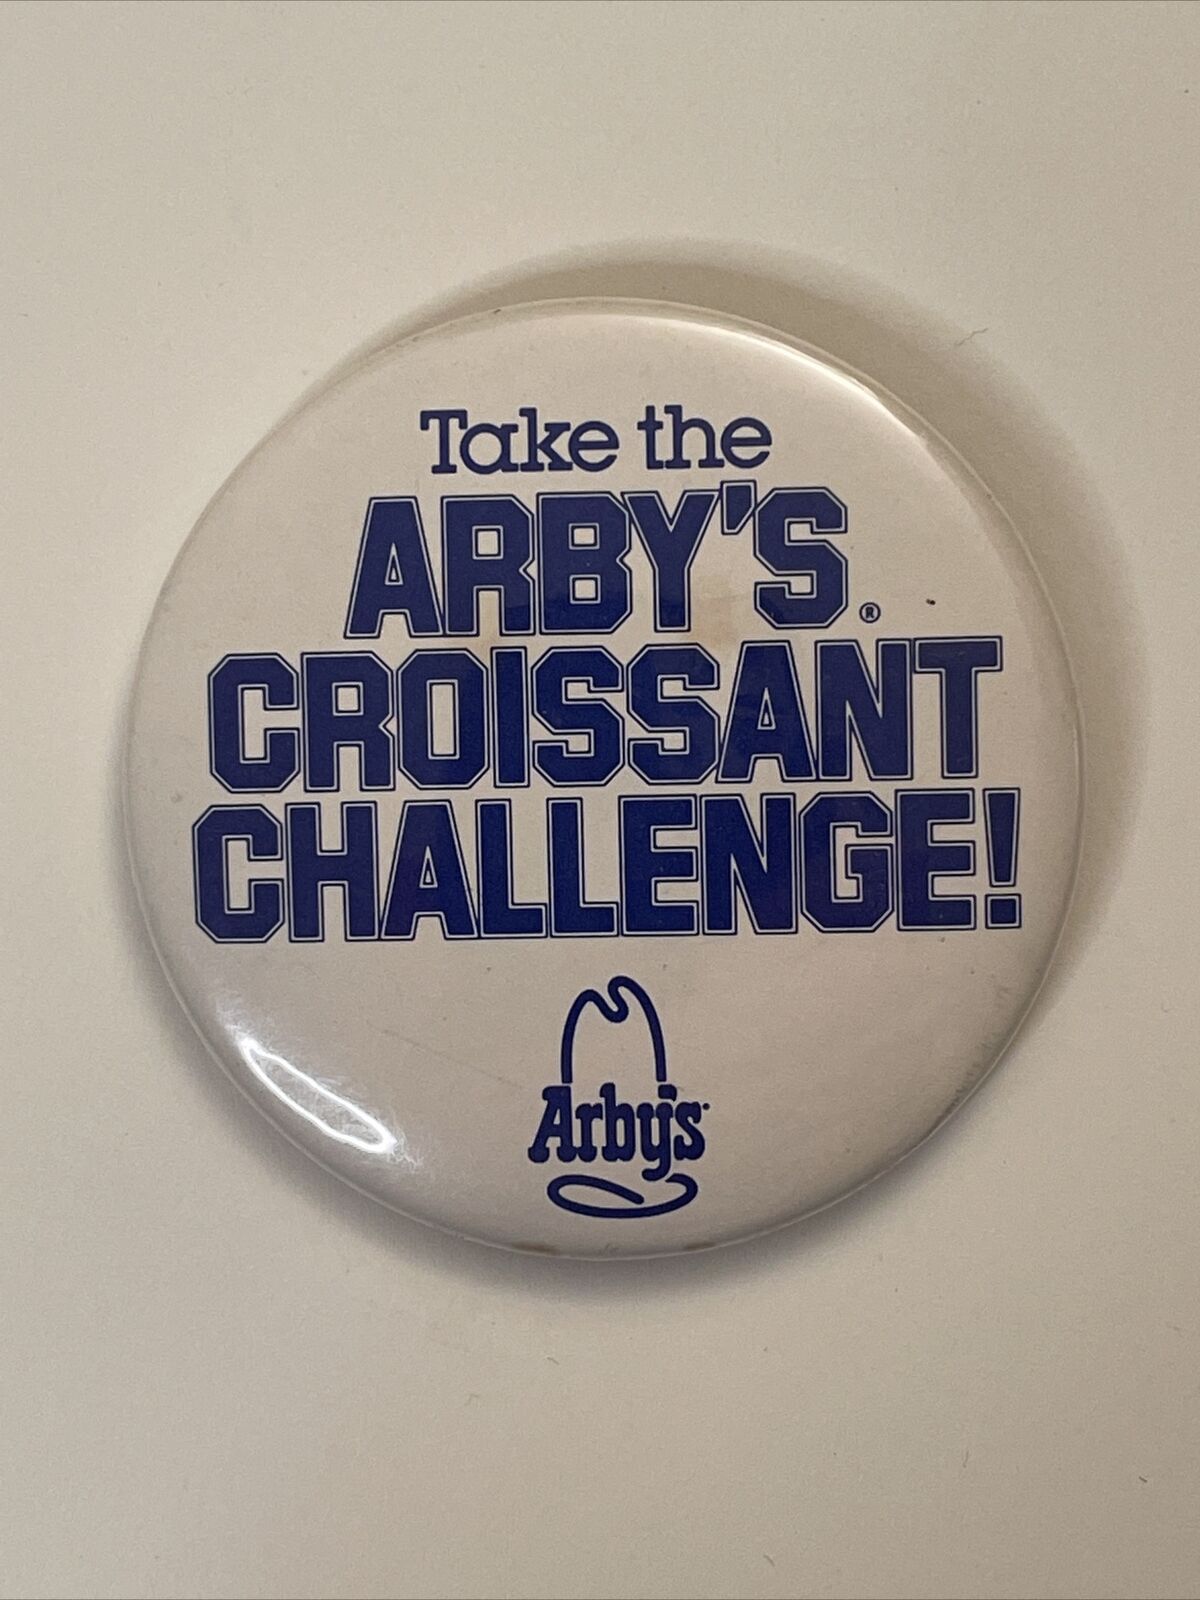 Vintage ARBY’S Pin - Take The Arby’s Croissant Challenge - 1983 Pinback Badge